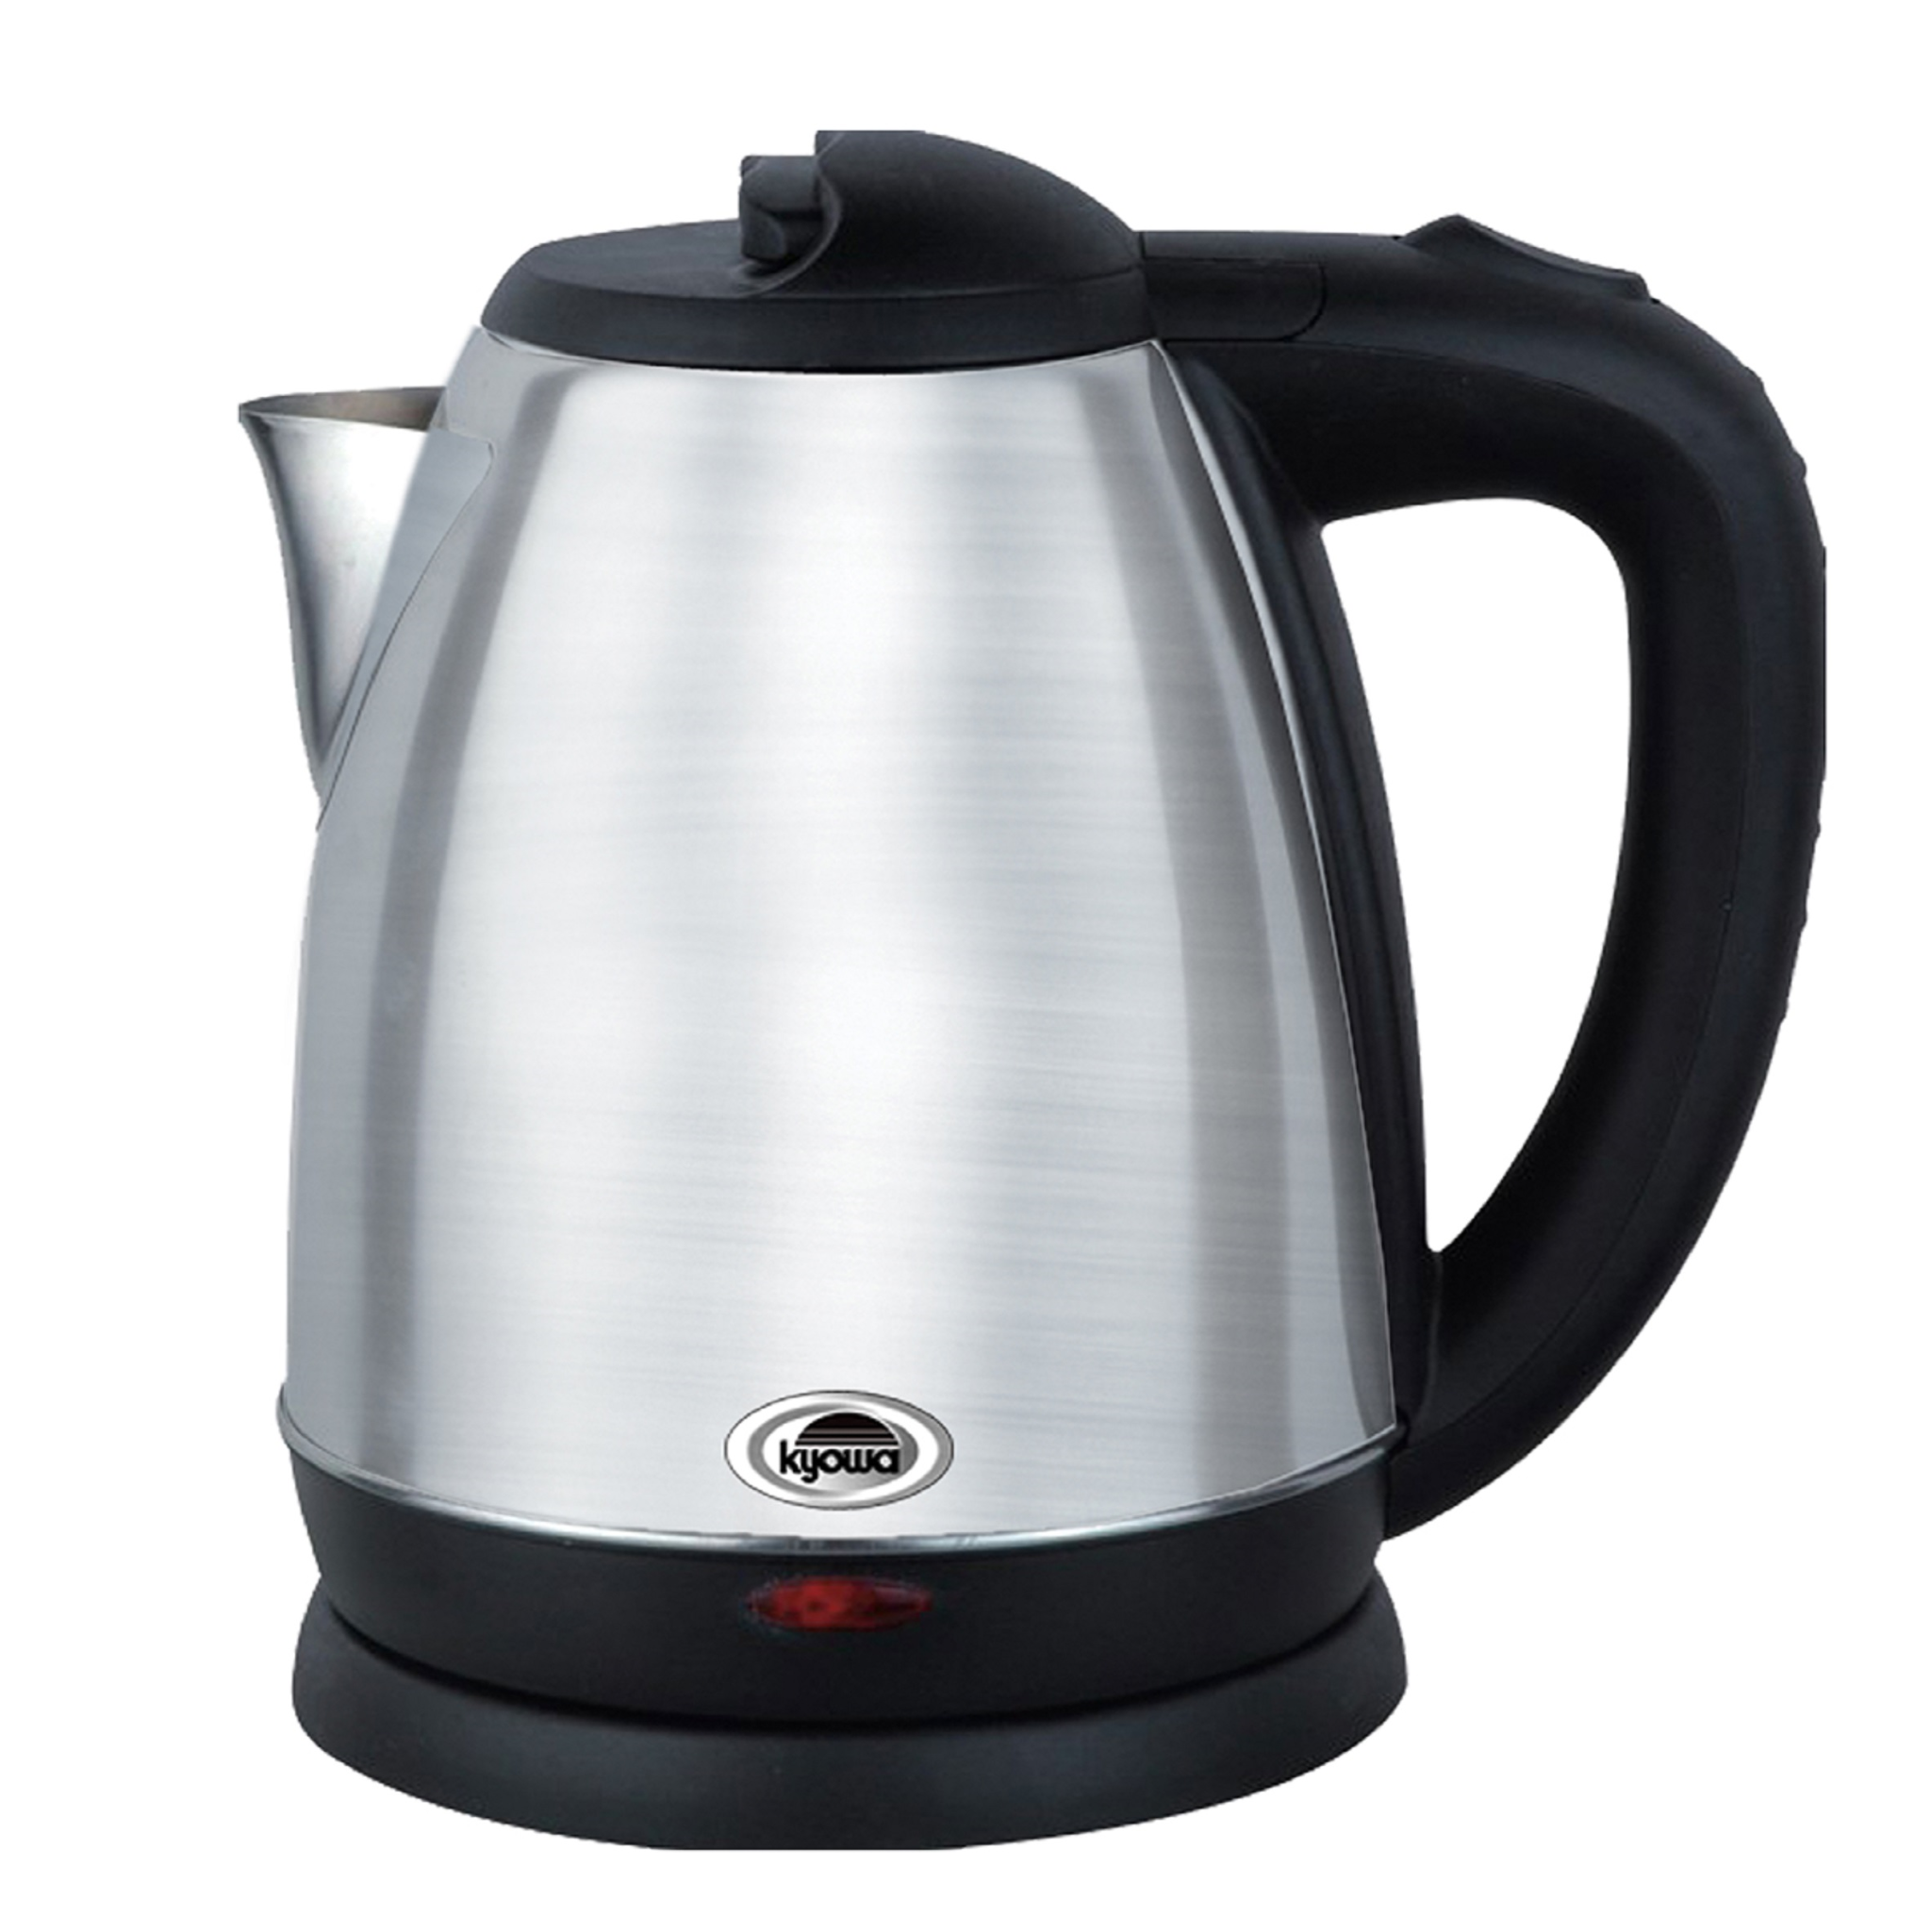 Kyowa KW-1362 1.7 L Stainless Electric Kettle